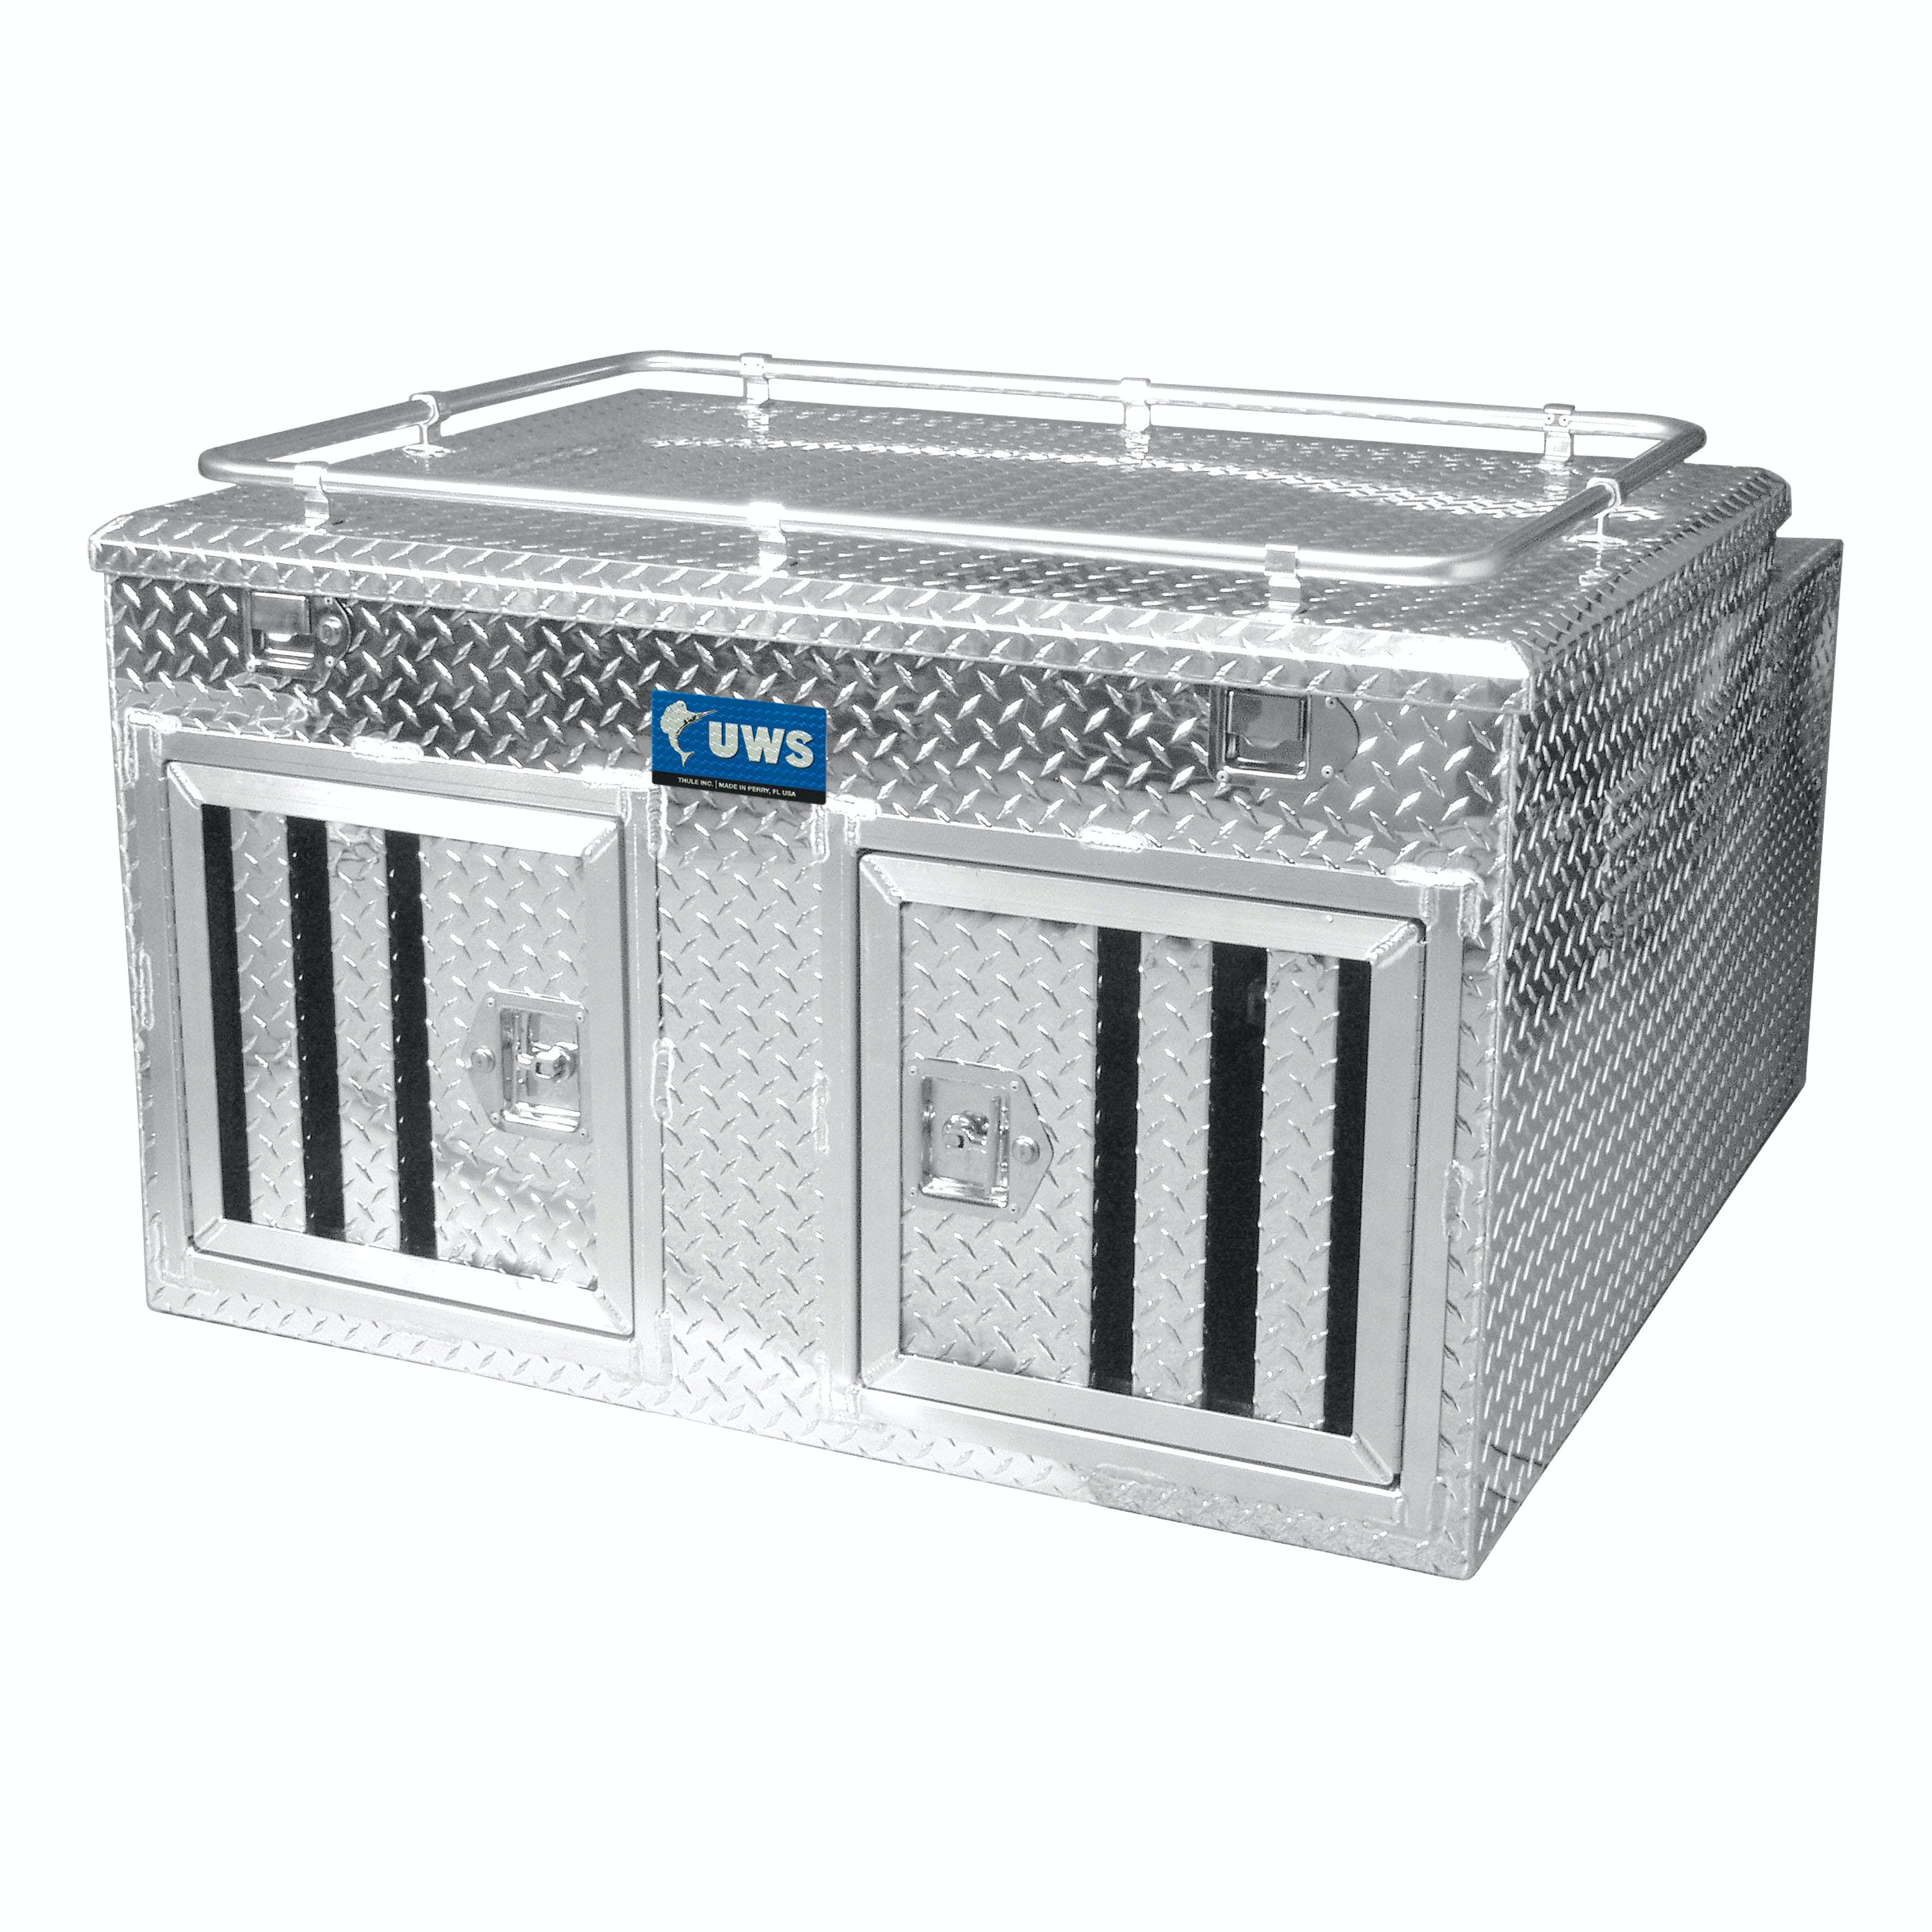 UWS DB-4848N 48 inch X 48 inch Aluminum Dog Box Double Door with Full Enclosure and Storage